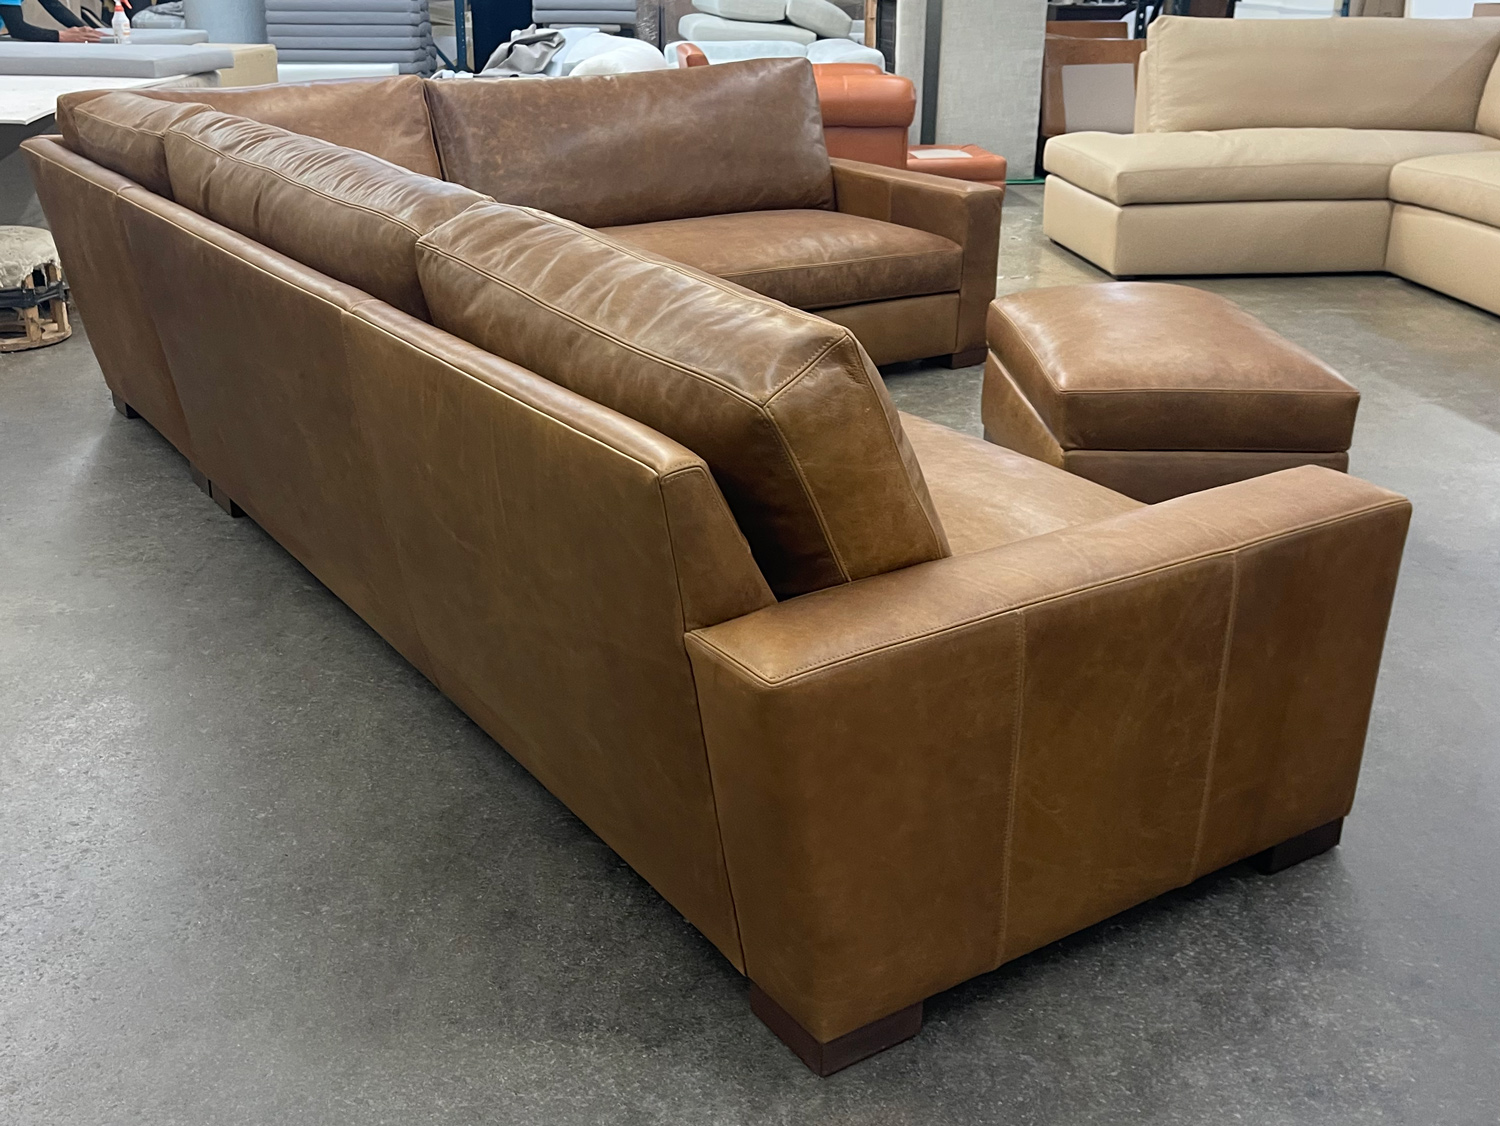 Custom Braxton L Sectional in Berkshire Tan Leather with matching Storage Ottoman - LAF rear angle